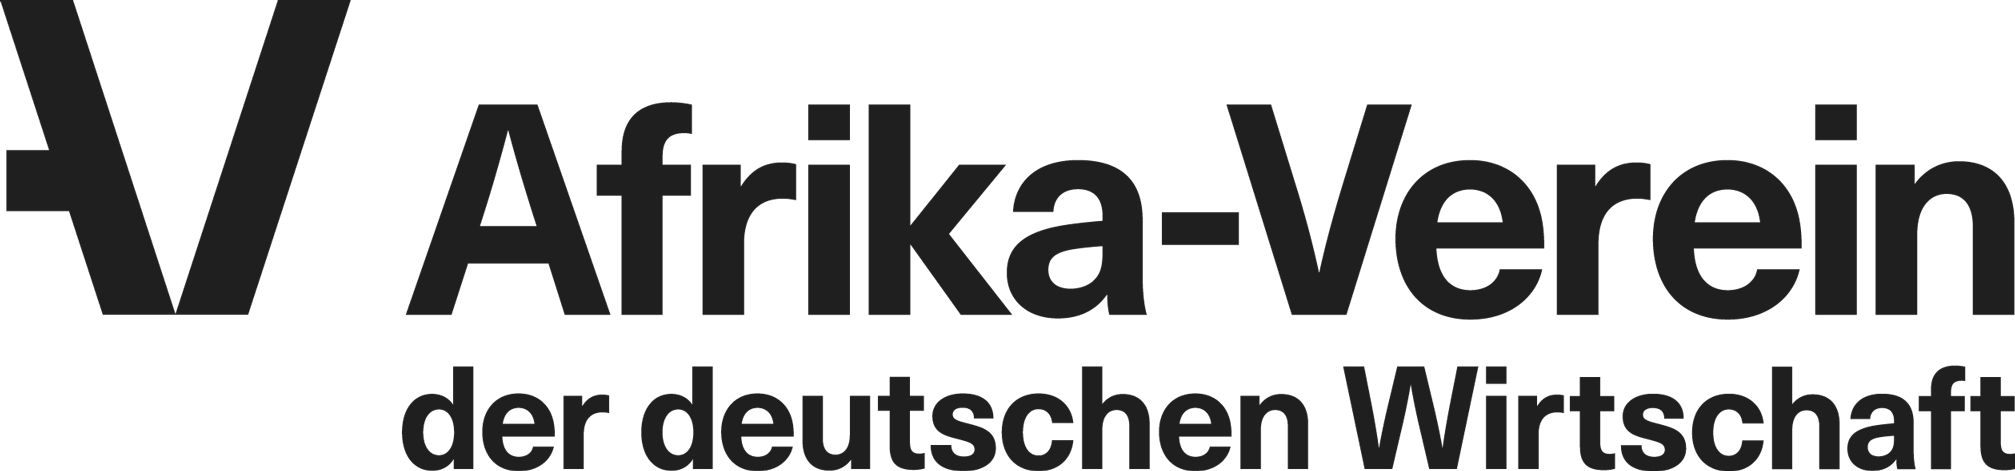 We are committed! – We are a member of the Afrika-Verein and would like to work with the association to expand and strengthen cooperation in the education and business sectors